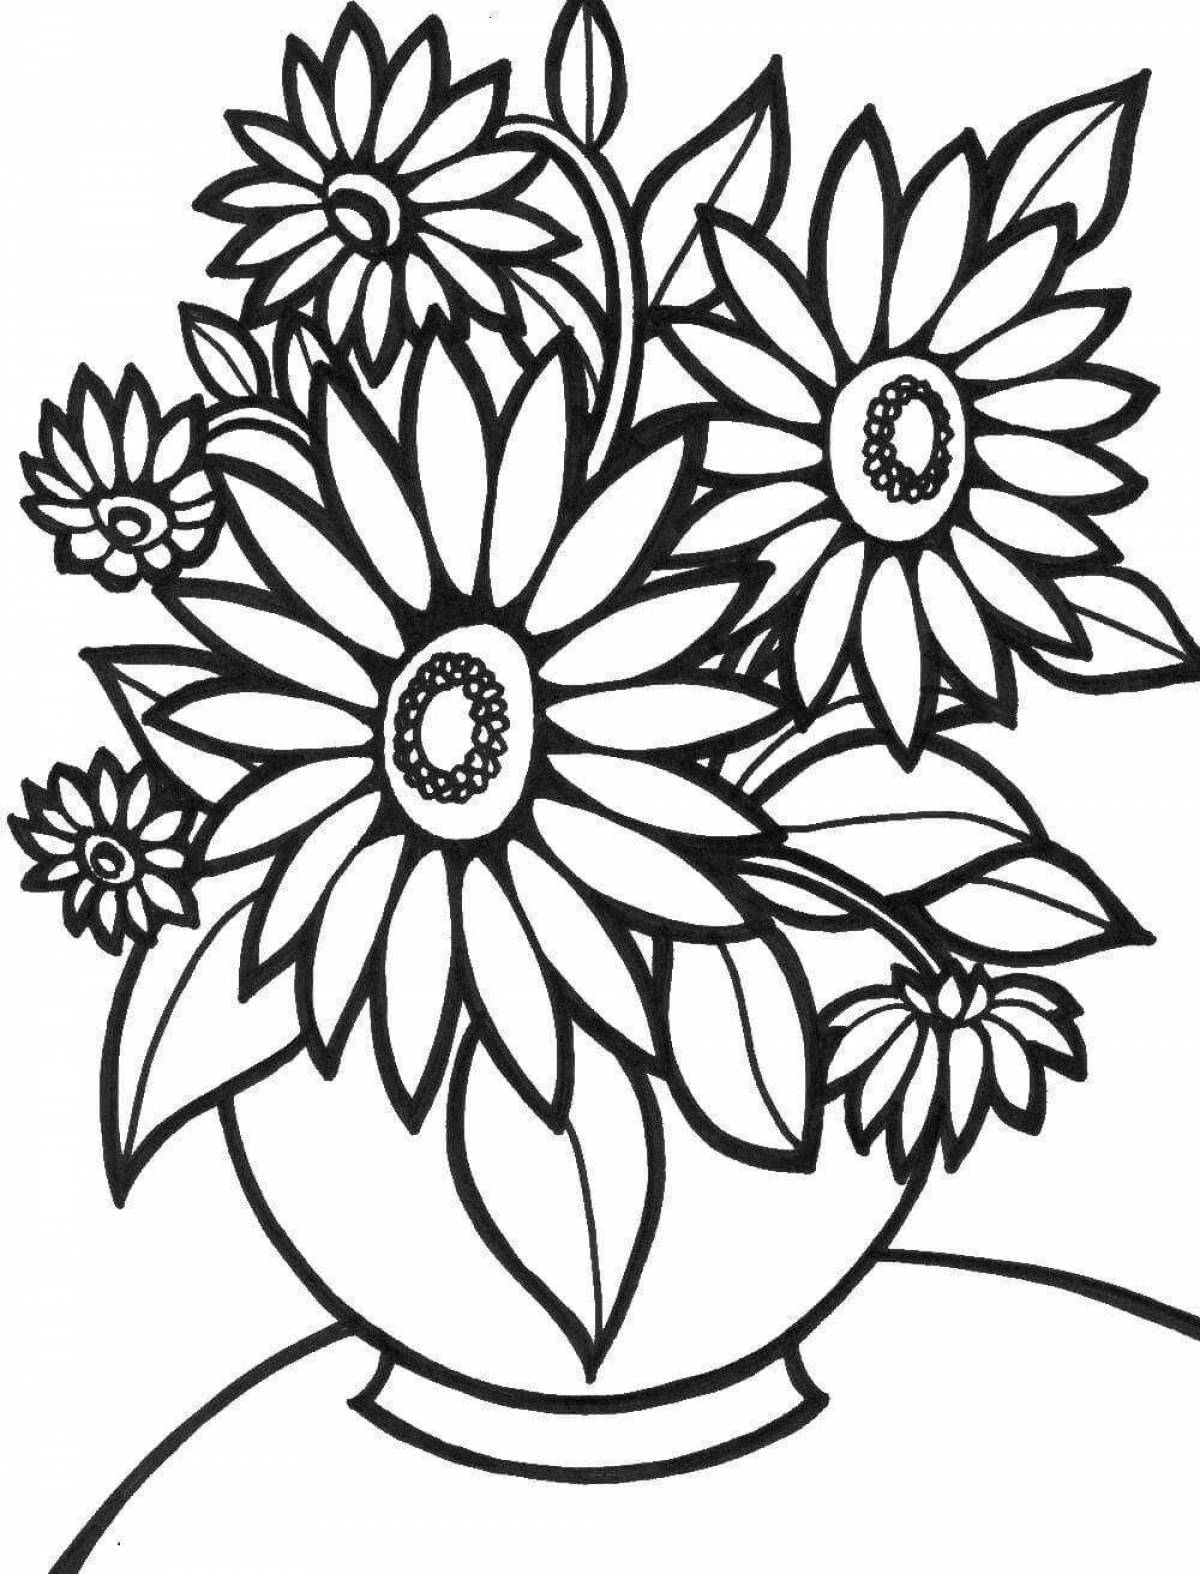 Radiantly coloring page различная красивая